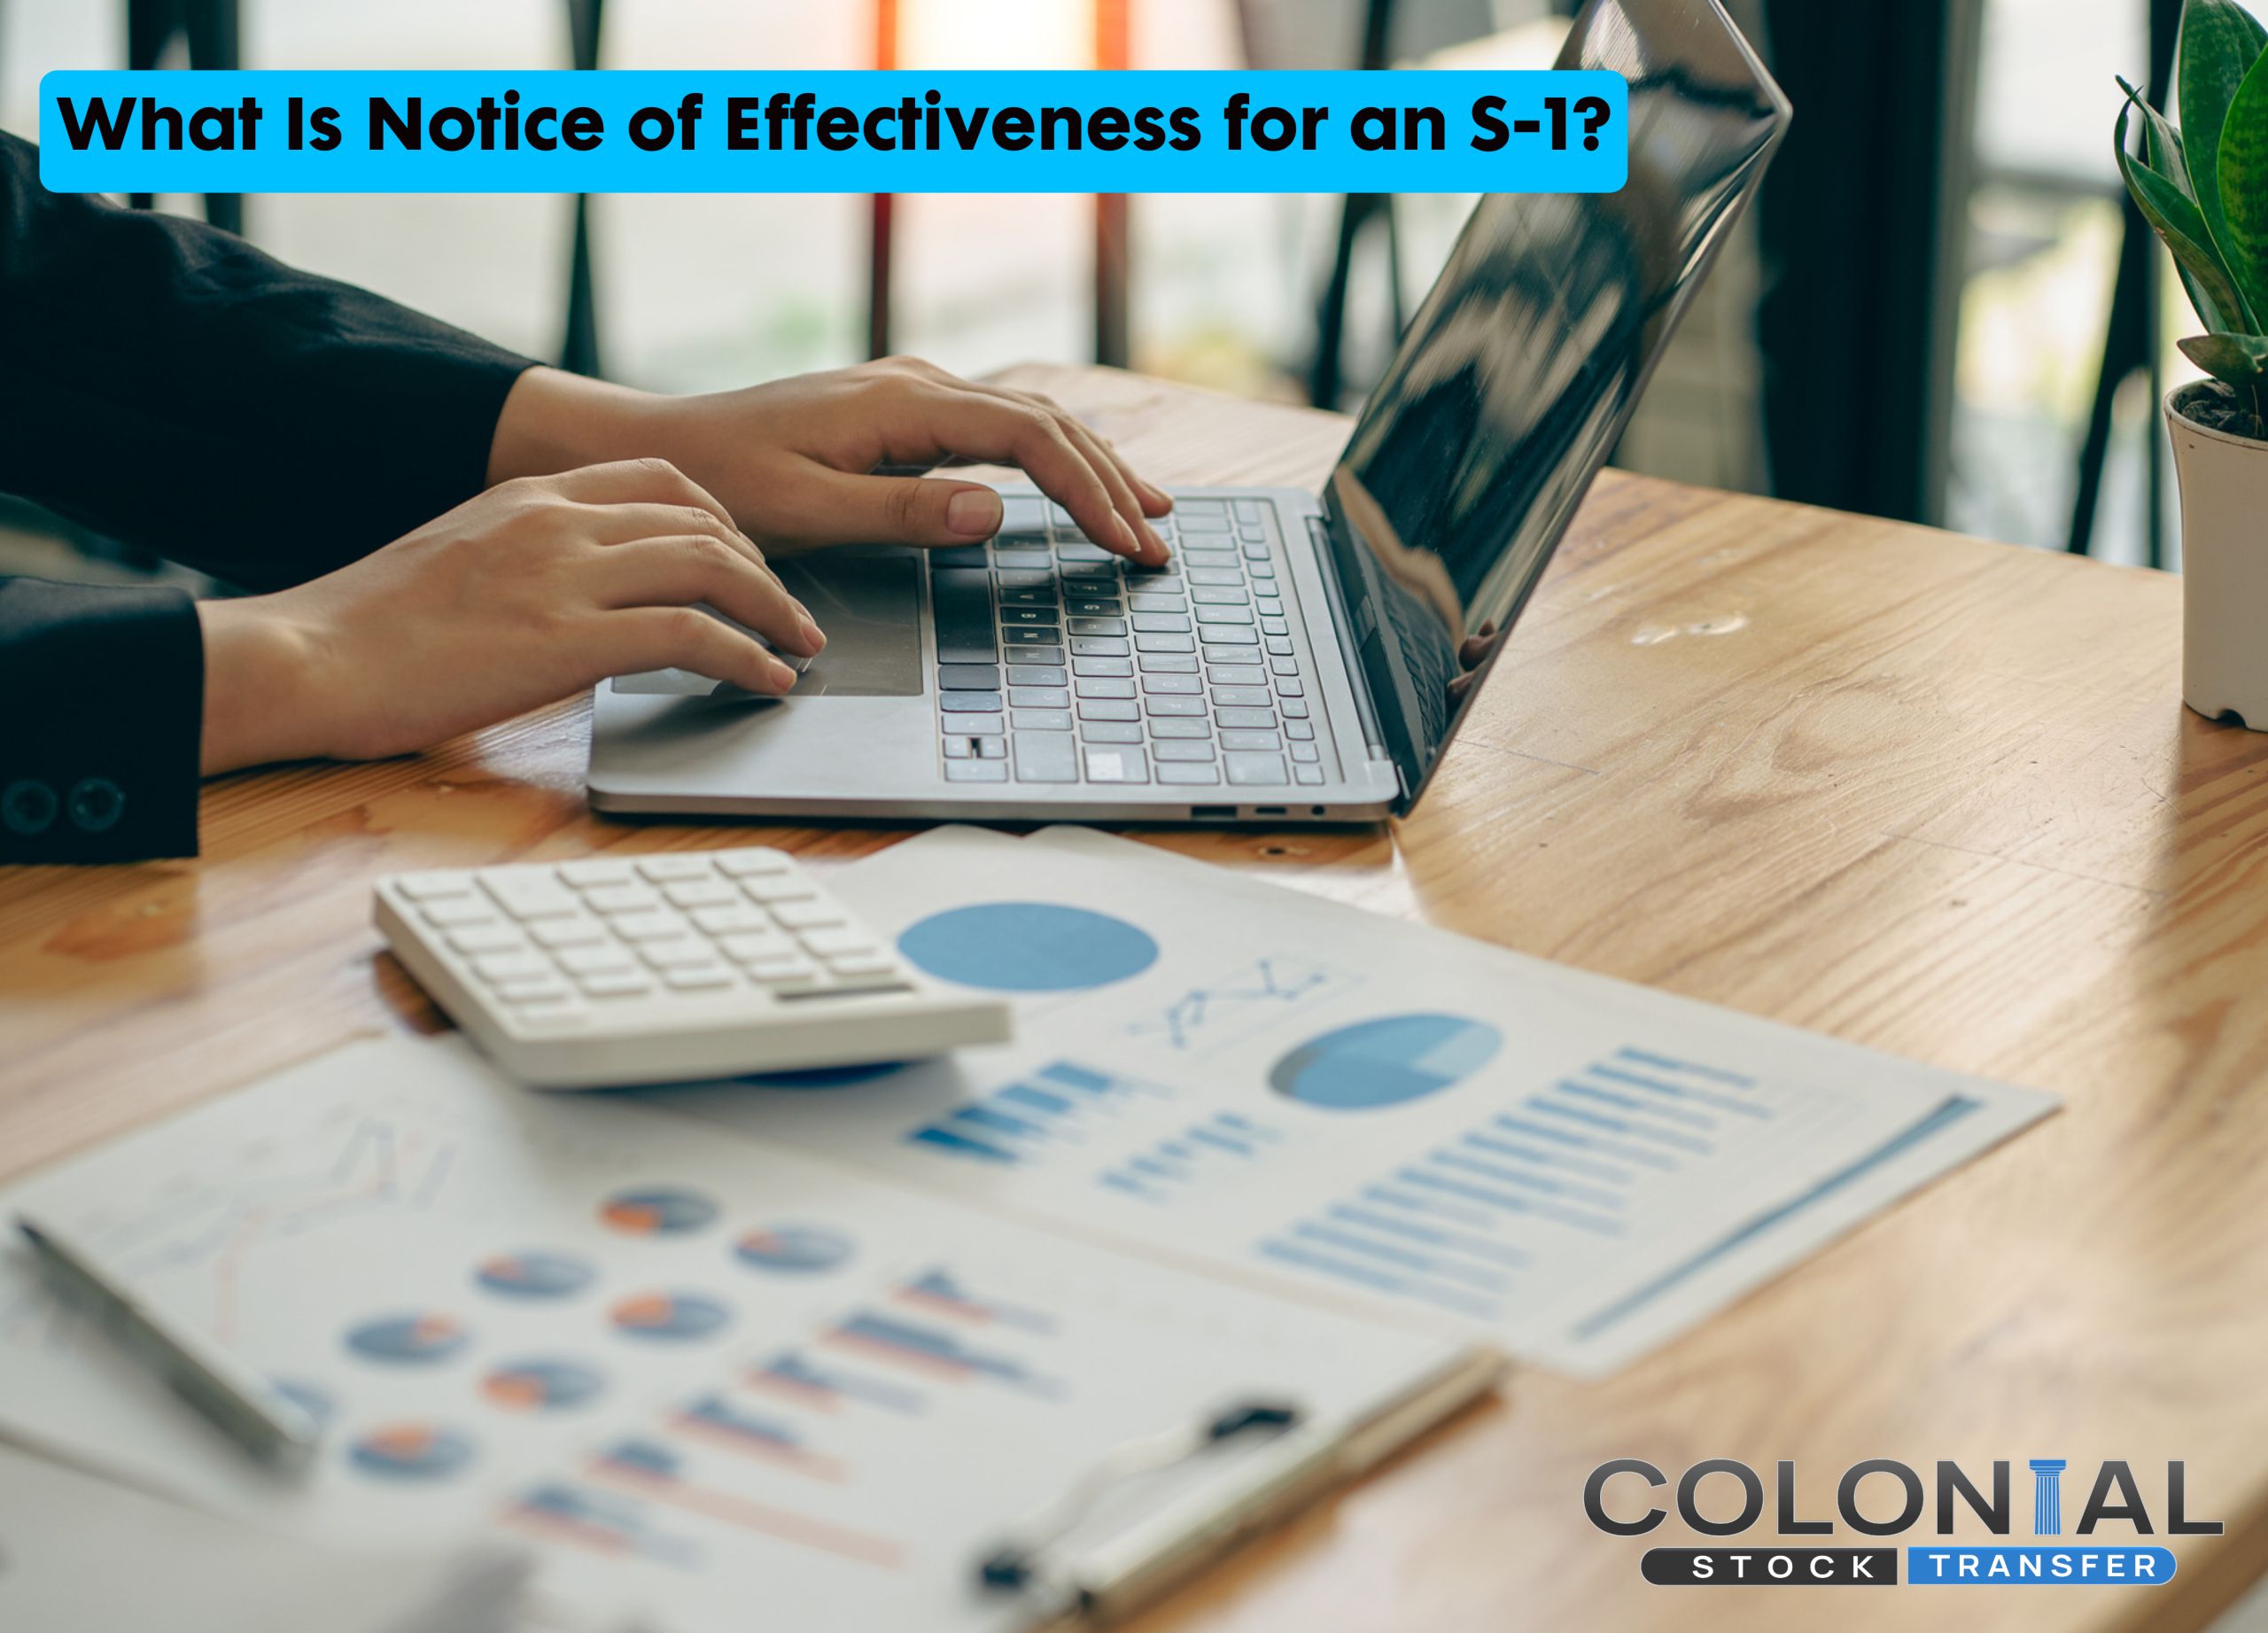 What Is Notice of Effectiveness for an S-1?